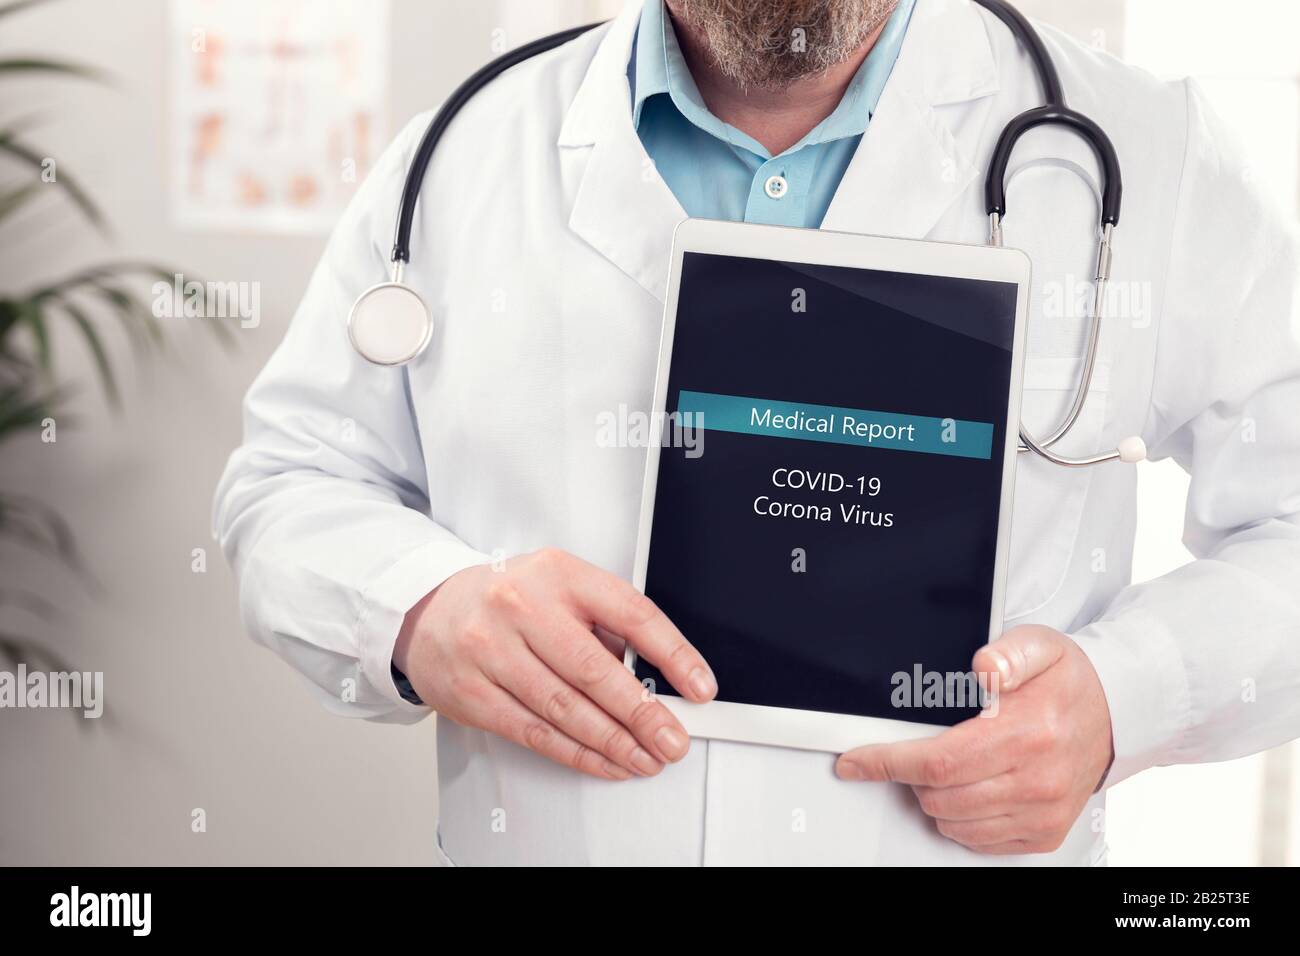 Male doctor showing medical covid-19 corona virus report on a tablet Stock Photo